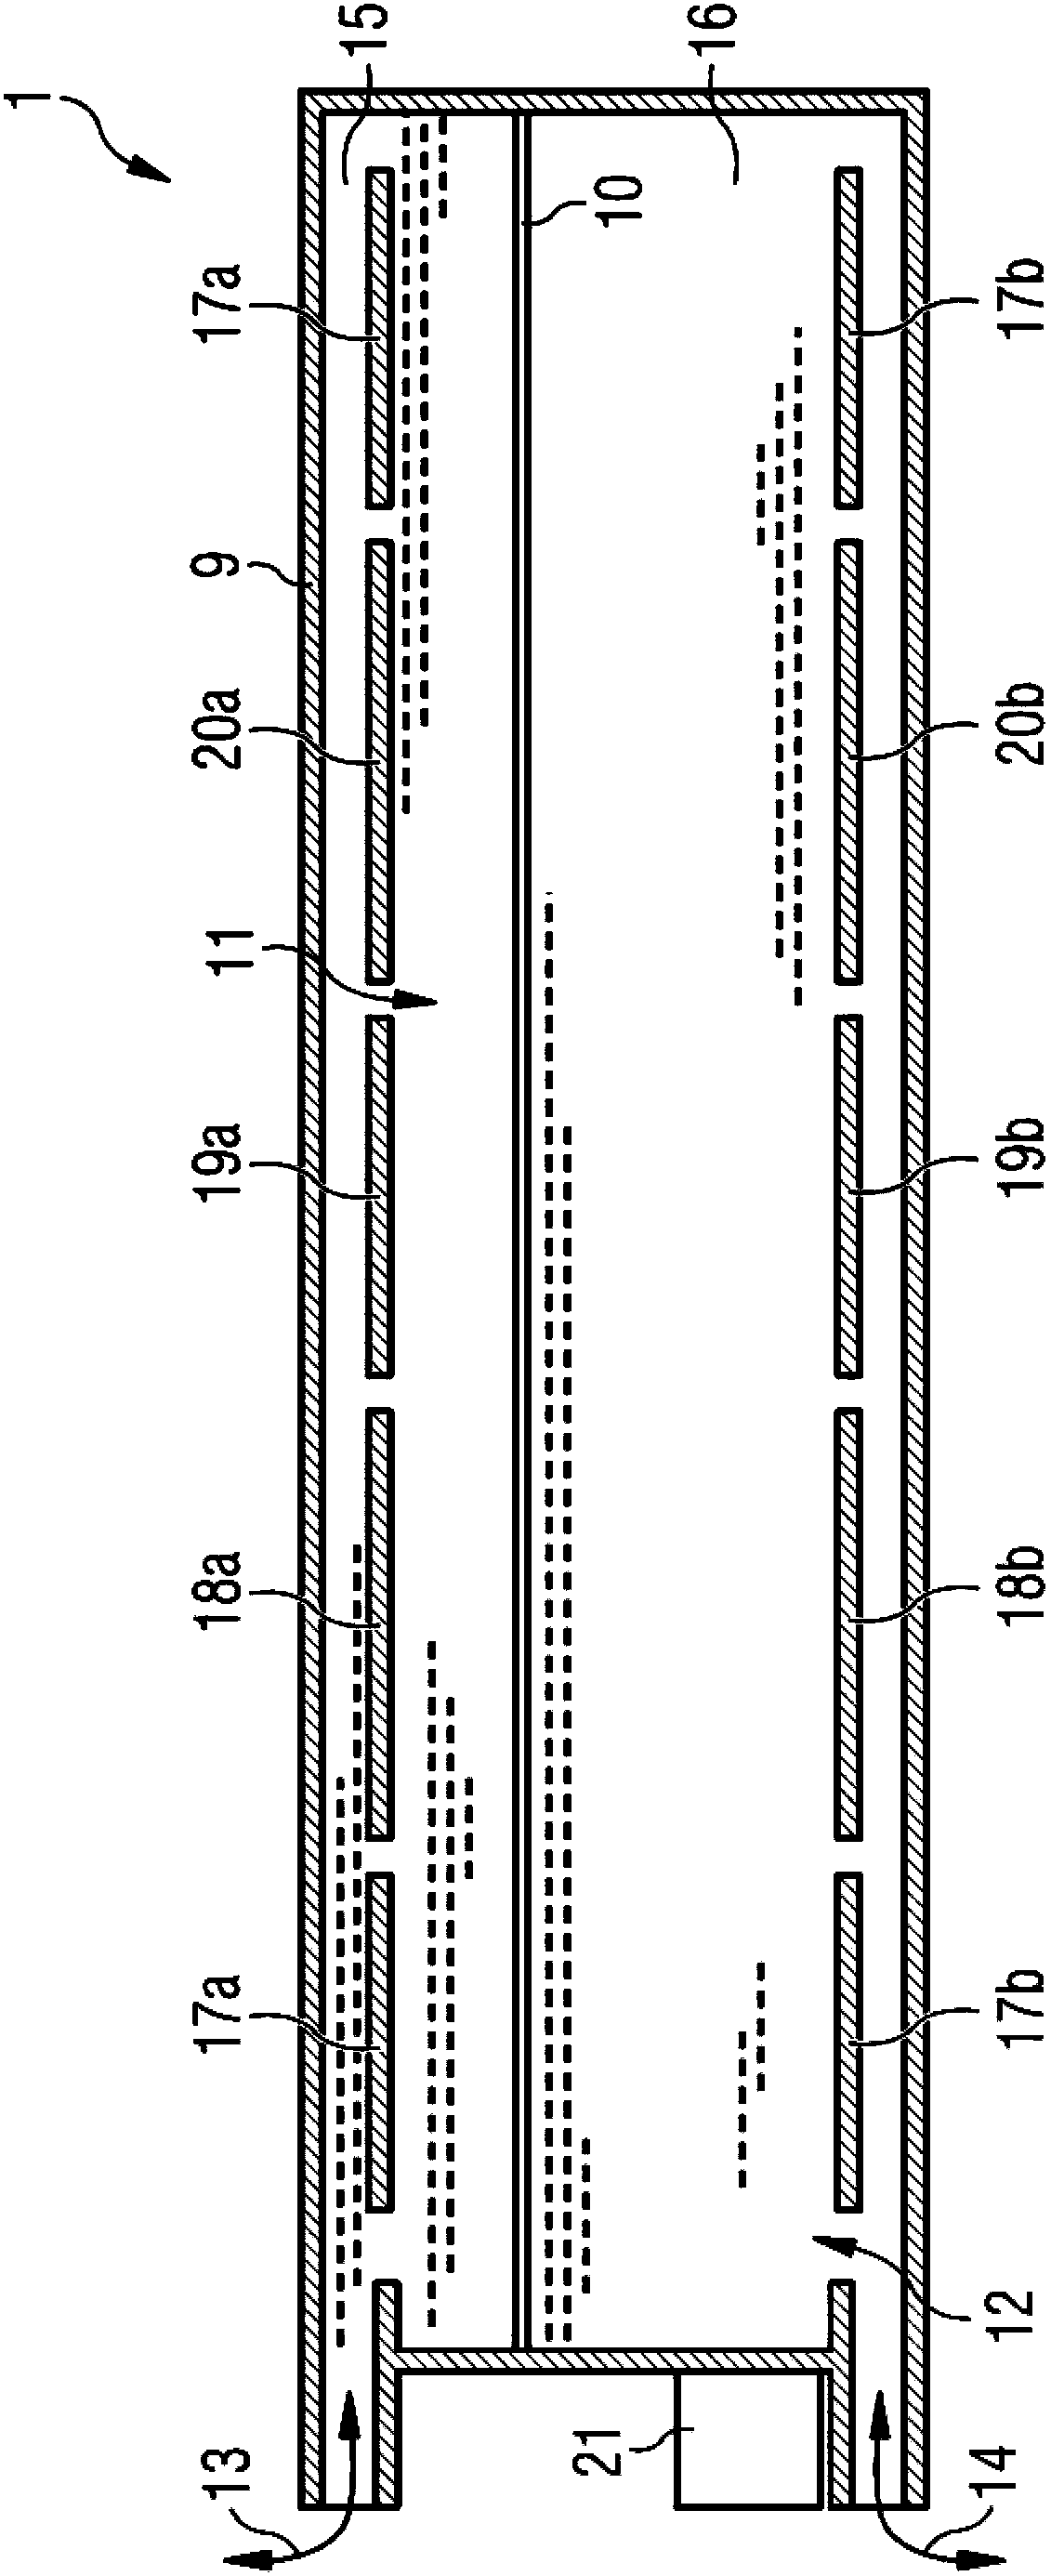 Adaptive X-ray filter for changing local intensity of X-ray radiation